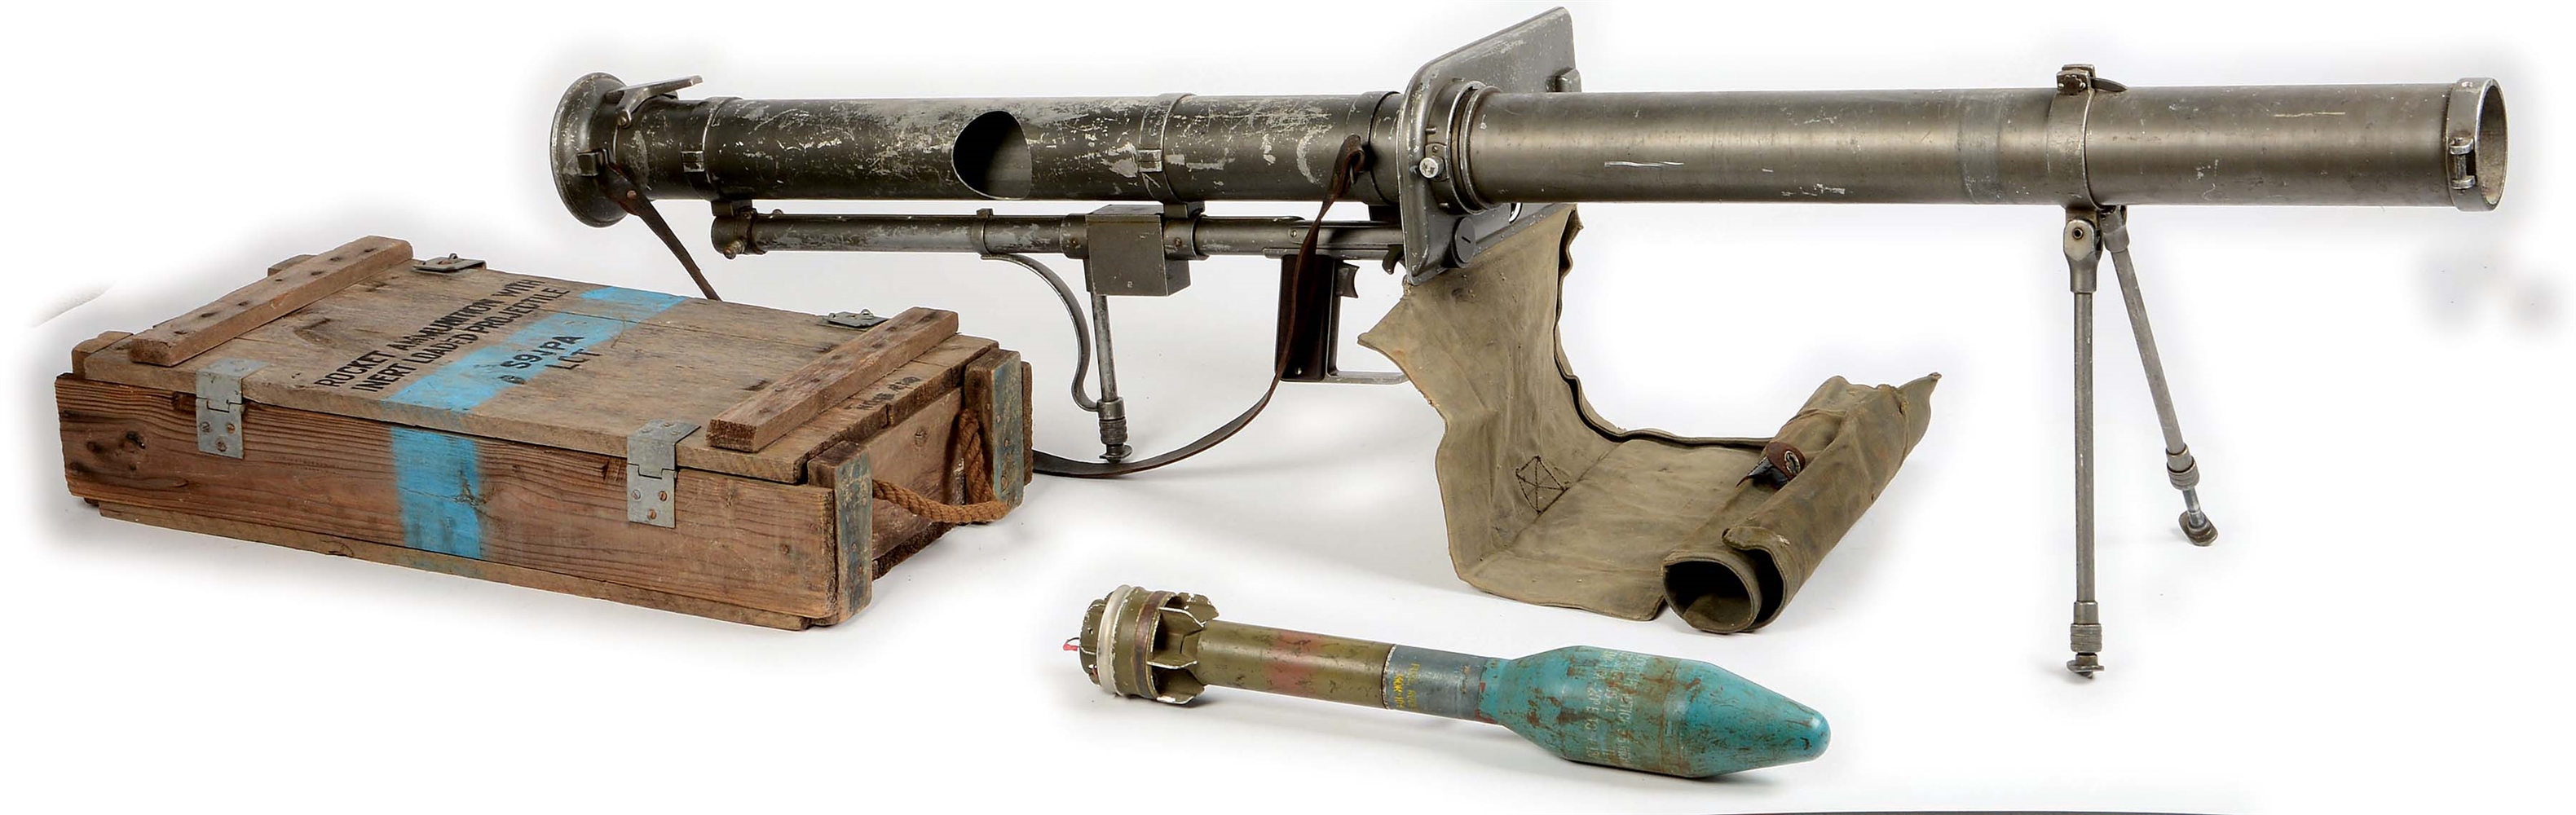 M65 BAZOOKA WITH CARRY CRATE AND INERT ROCKET.